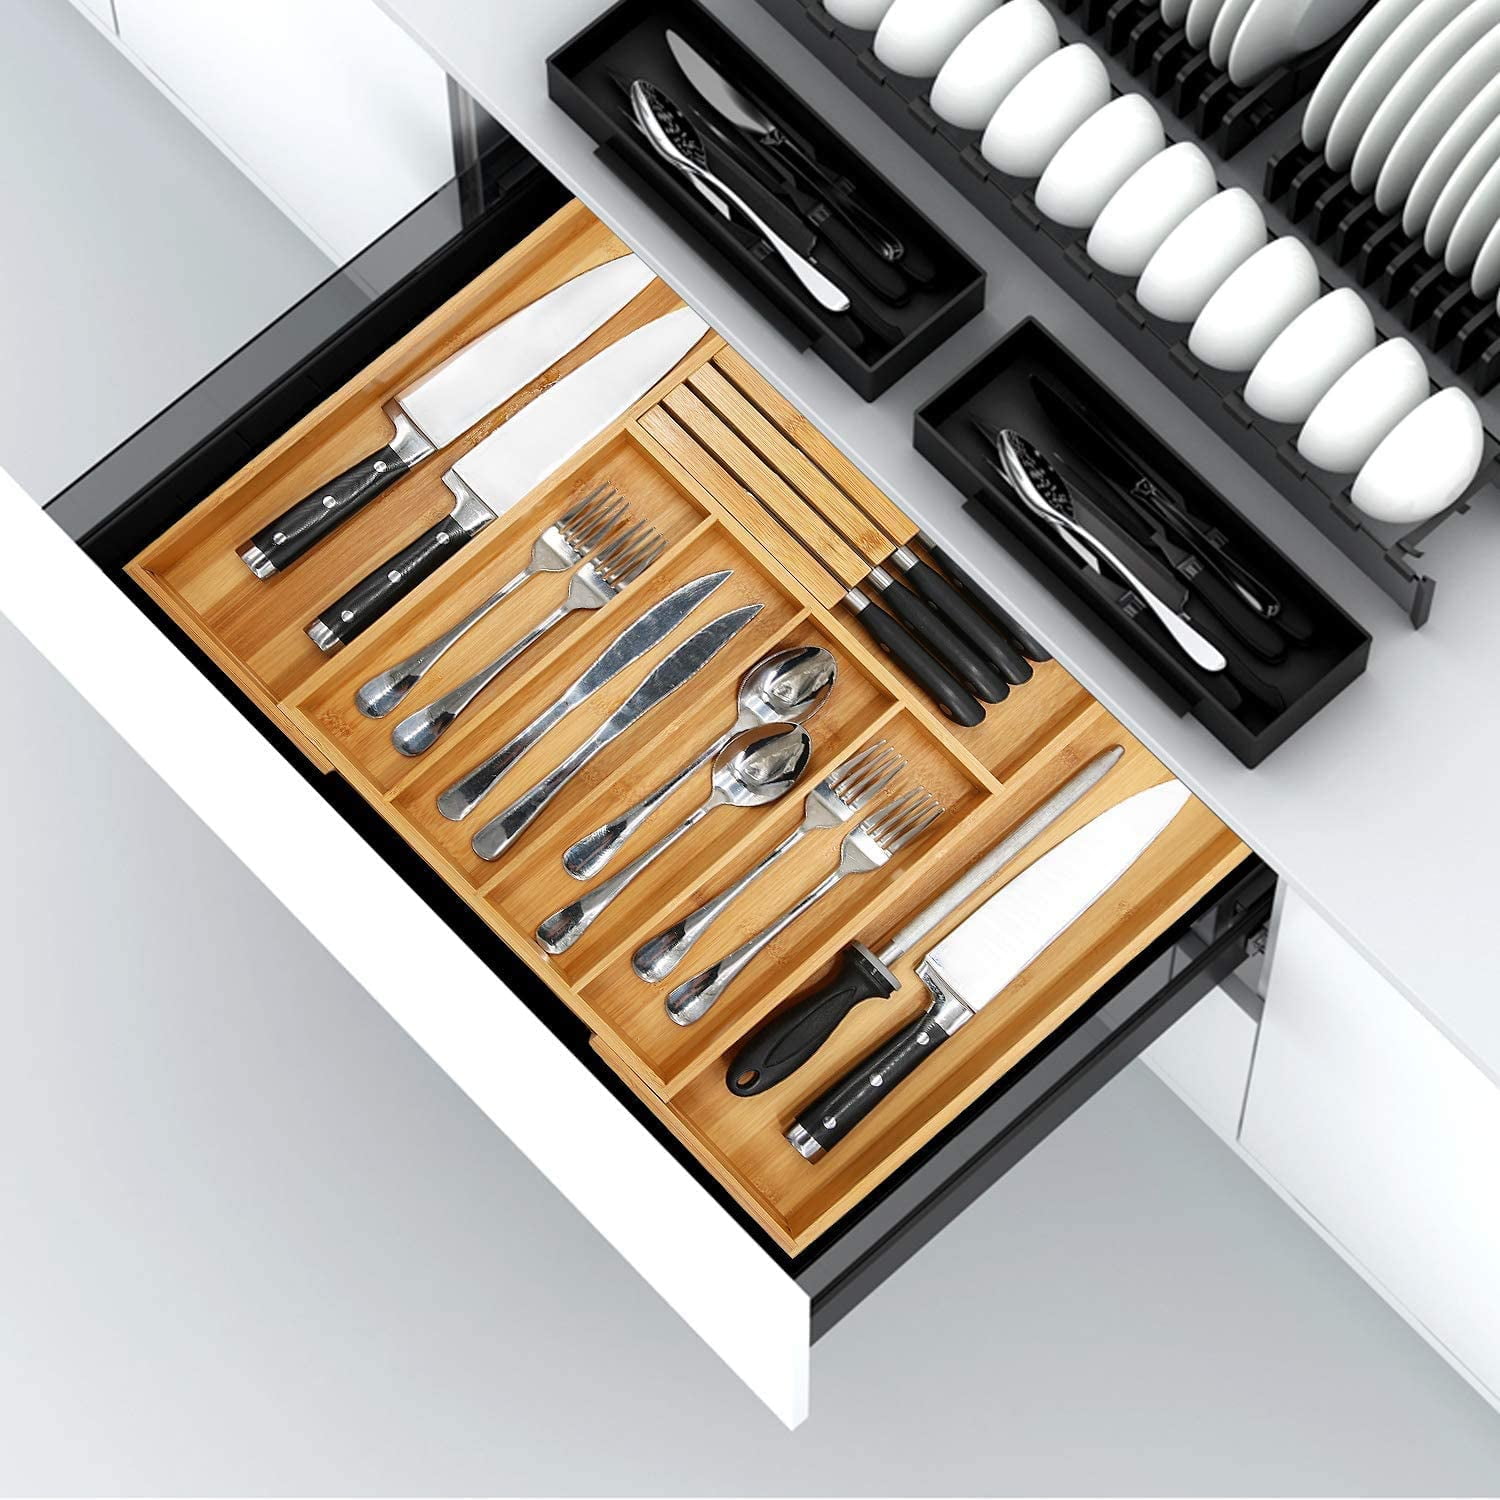 OMAIA Kitchen Drawer Organizer, 2-Tier Knife Holder - Expandable Cutlery Tray for Silverware, Flatware, Utensils - Non-BPA Plastic, Dishwasher-Safe